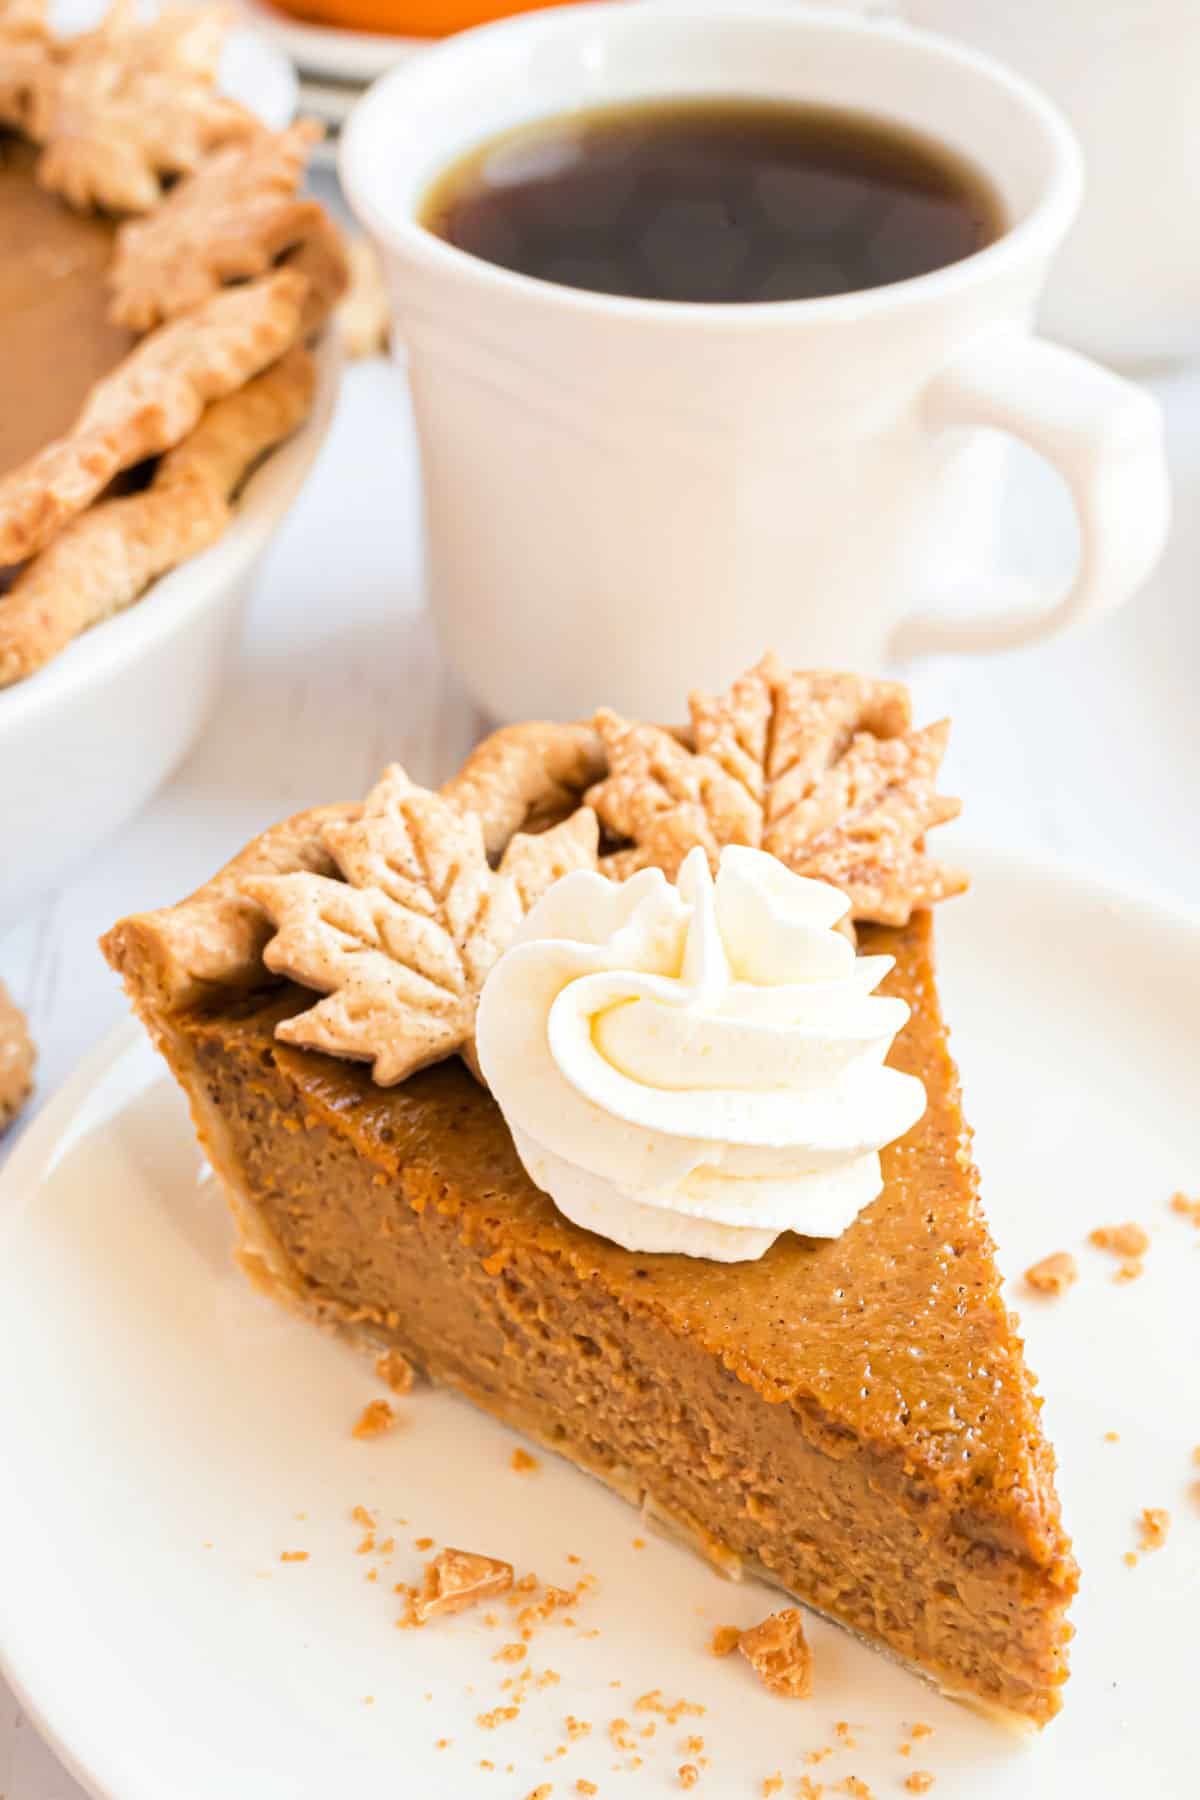 A slice of pumpkin pie on a white plate with whipped cream.